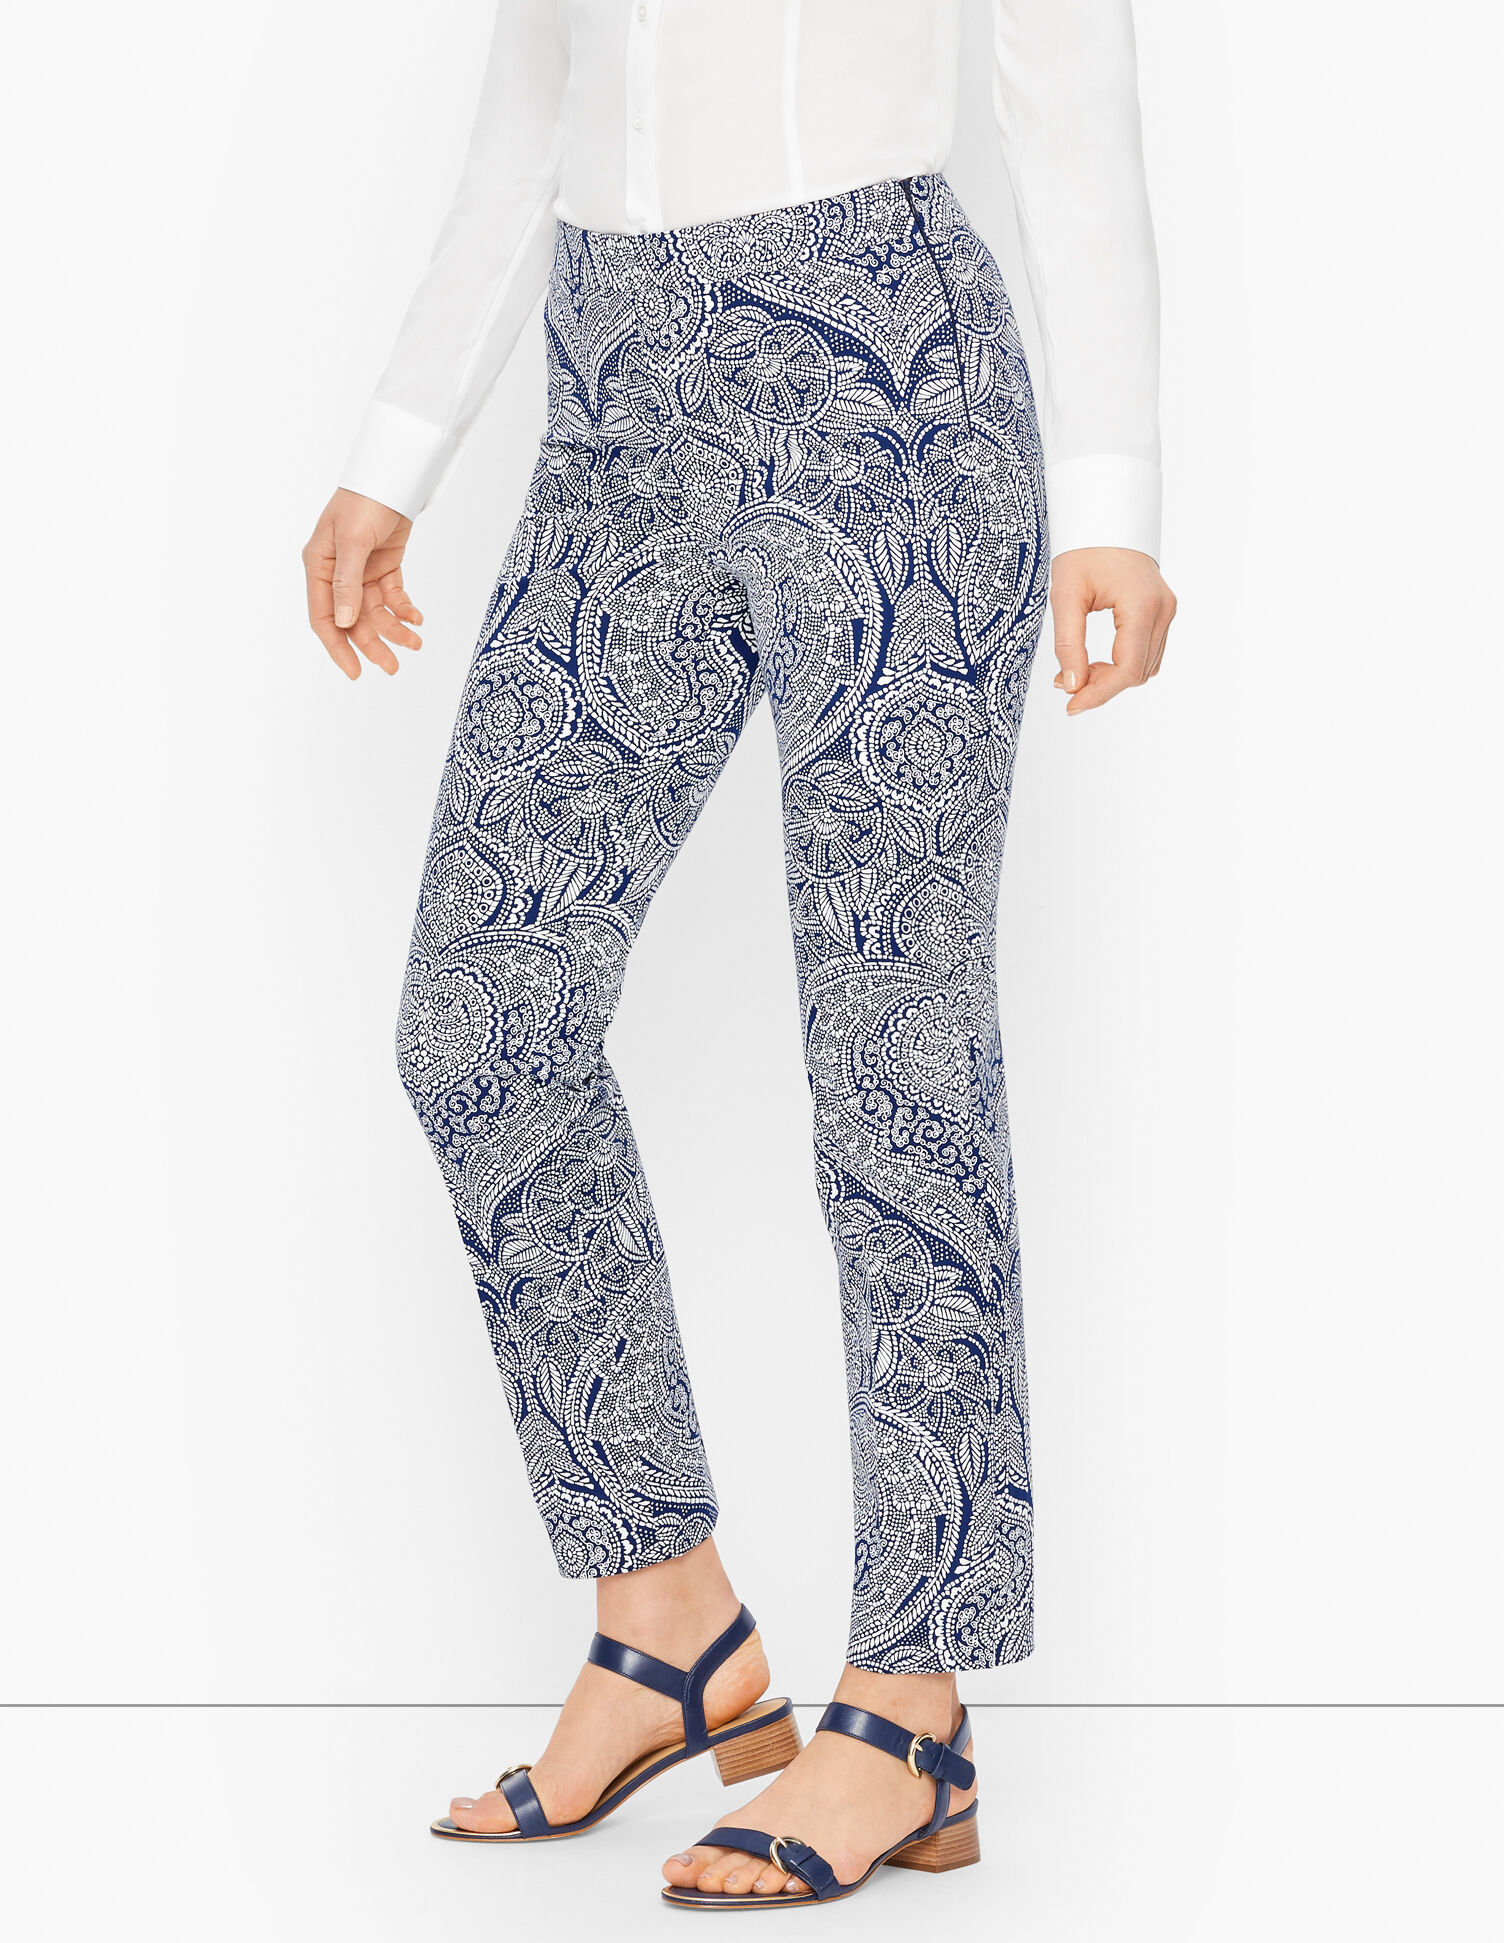 Talbots Chatham Ankle Pants - Floral